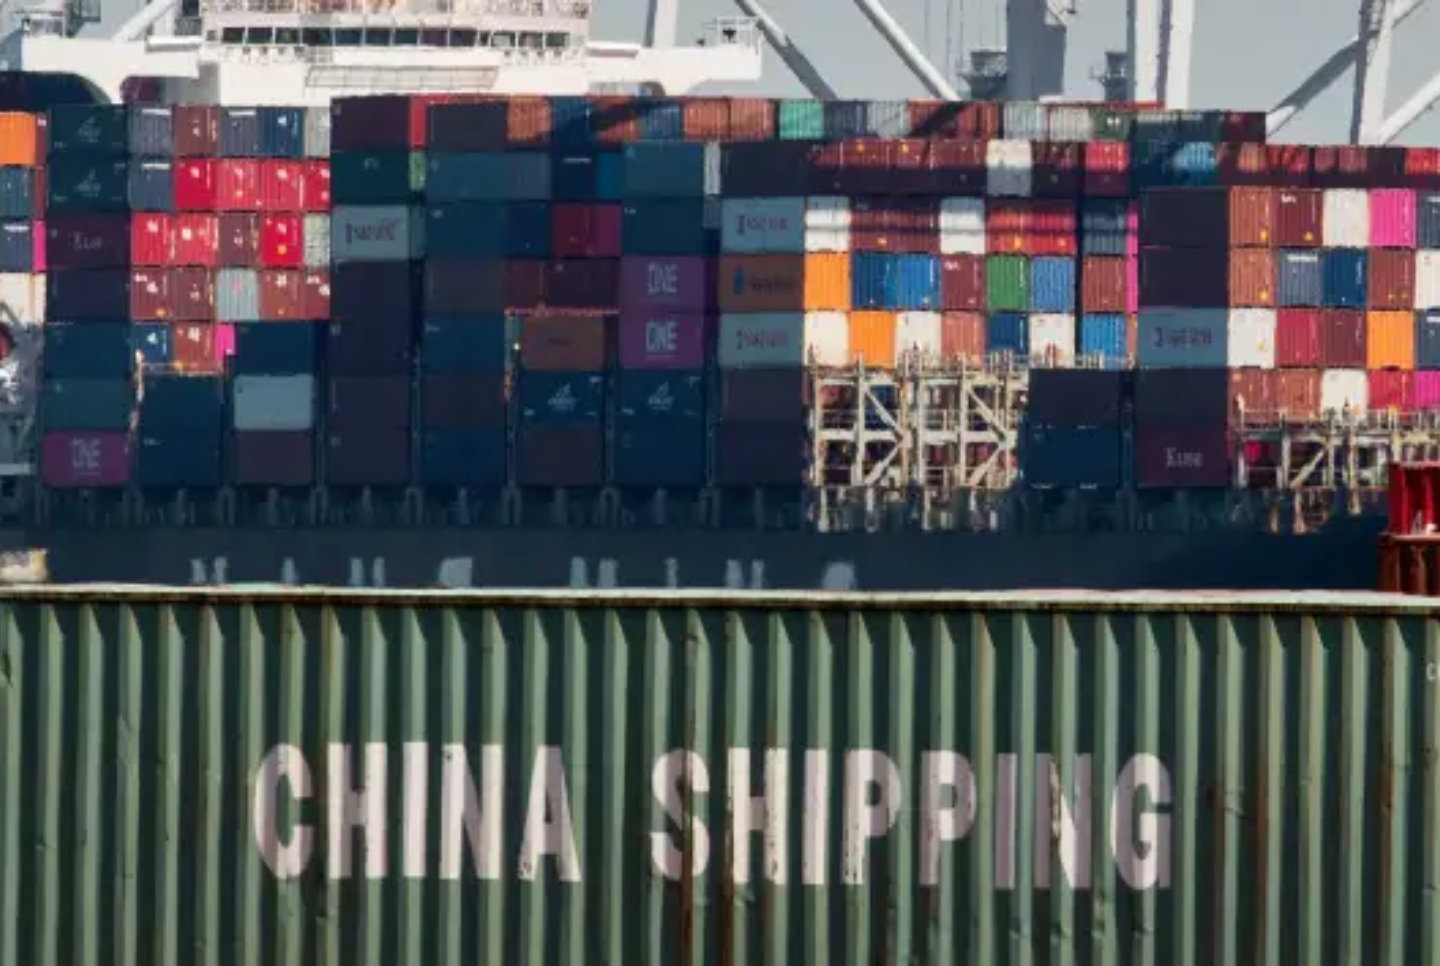 Businesses and consumers are bracing for another shipping crisis, as a virus outbreak in southern China disrupts port services and delays deliveries, threatening to drive up costs again.